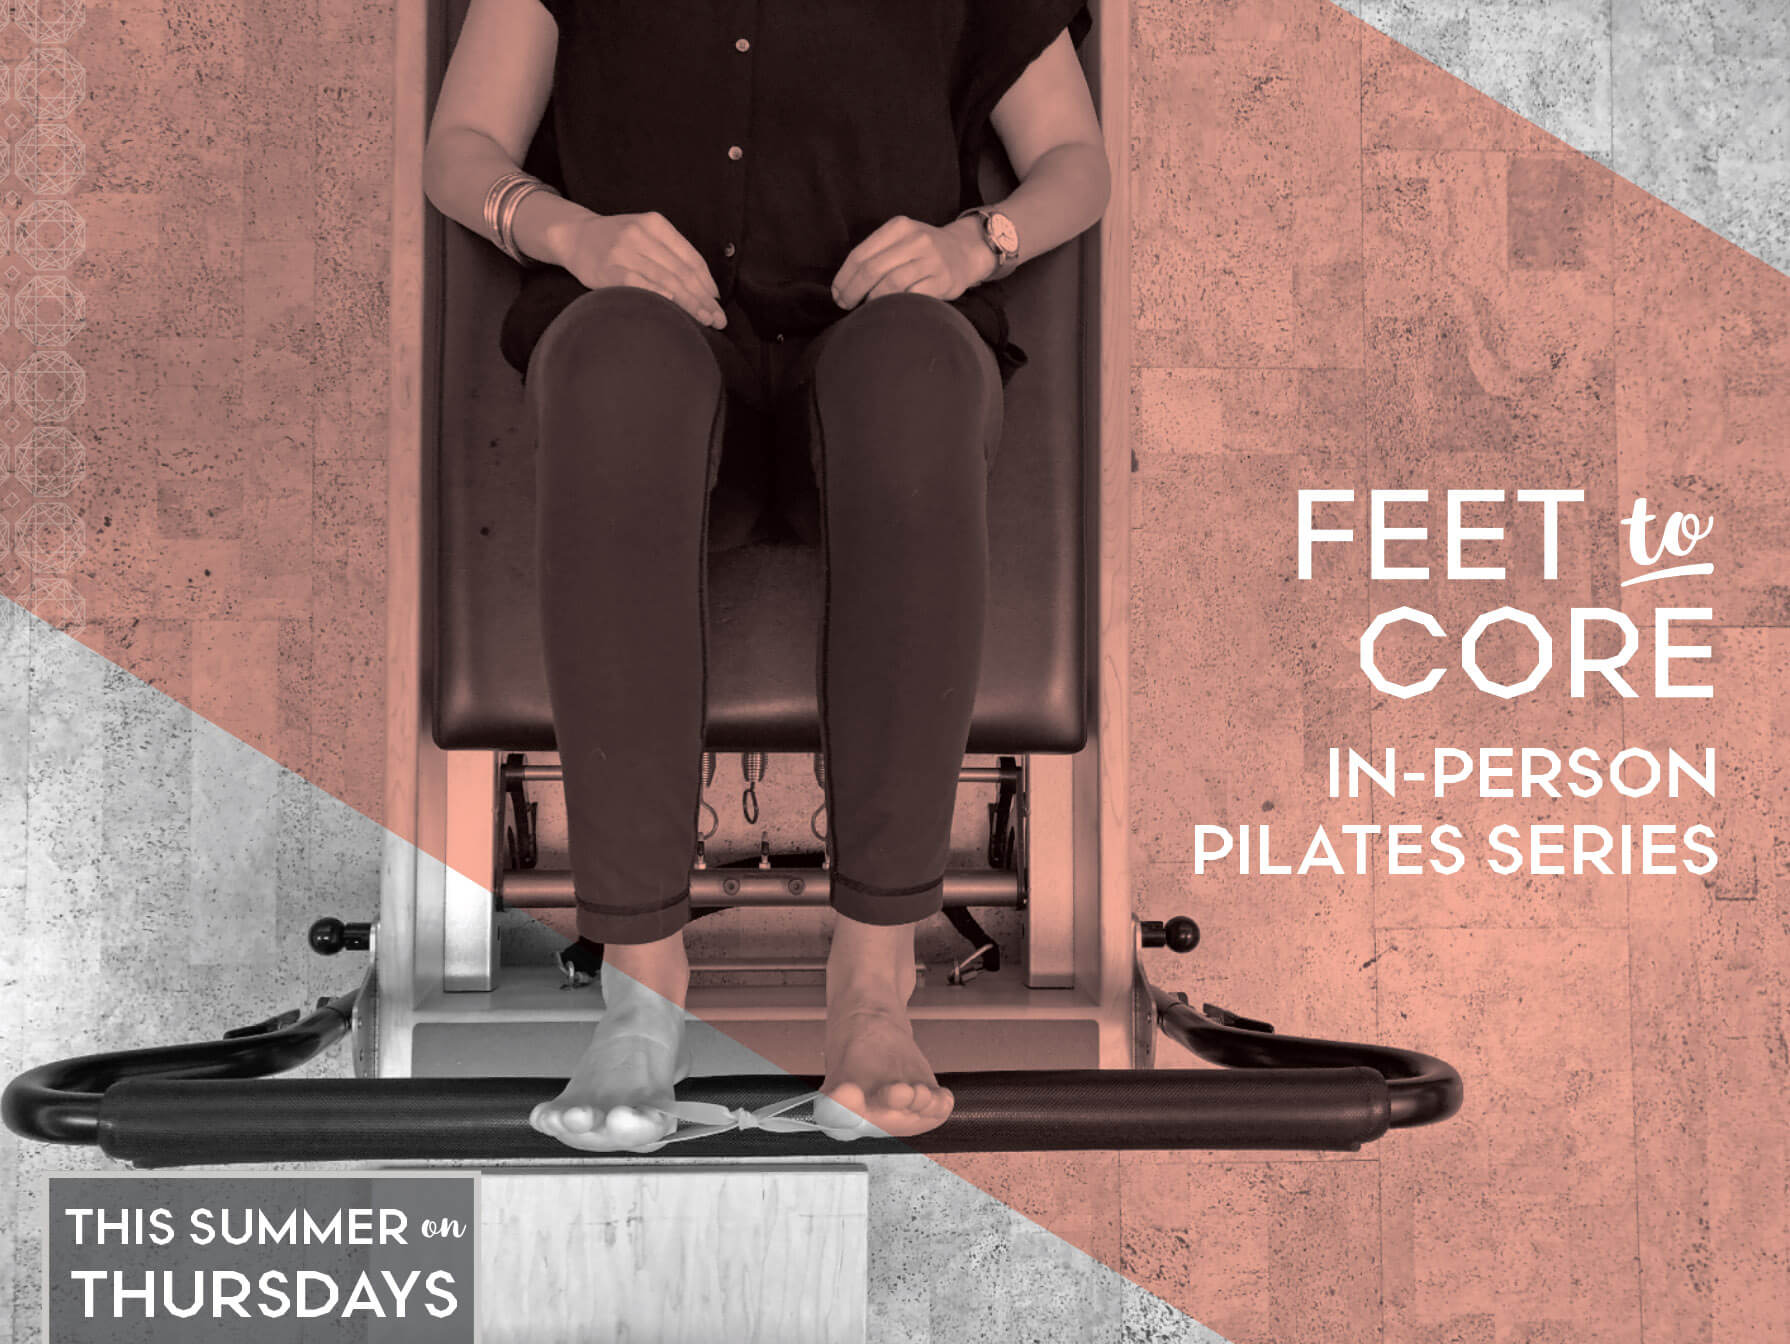 Feet to Core Connection: PIlates Series